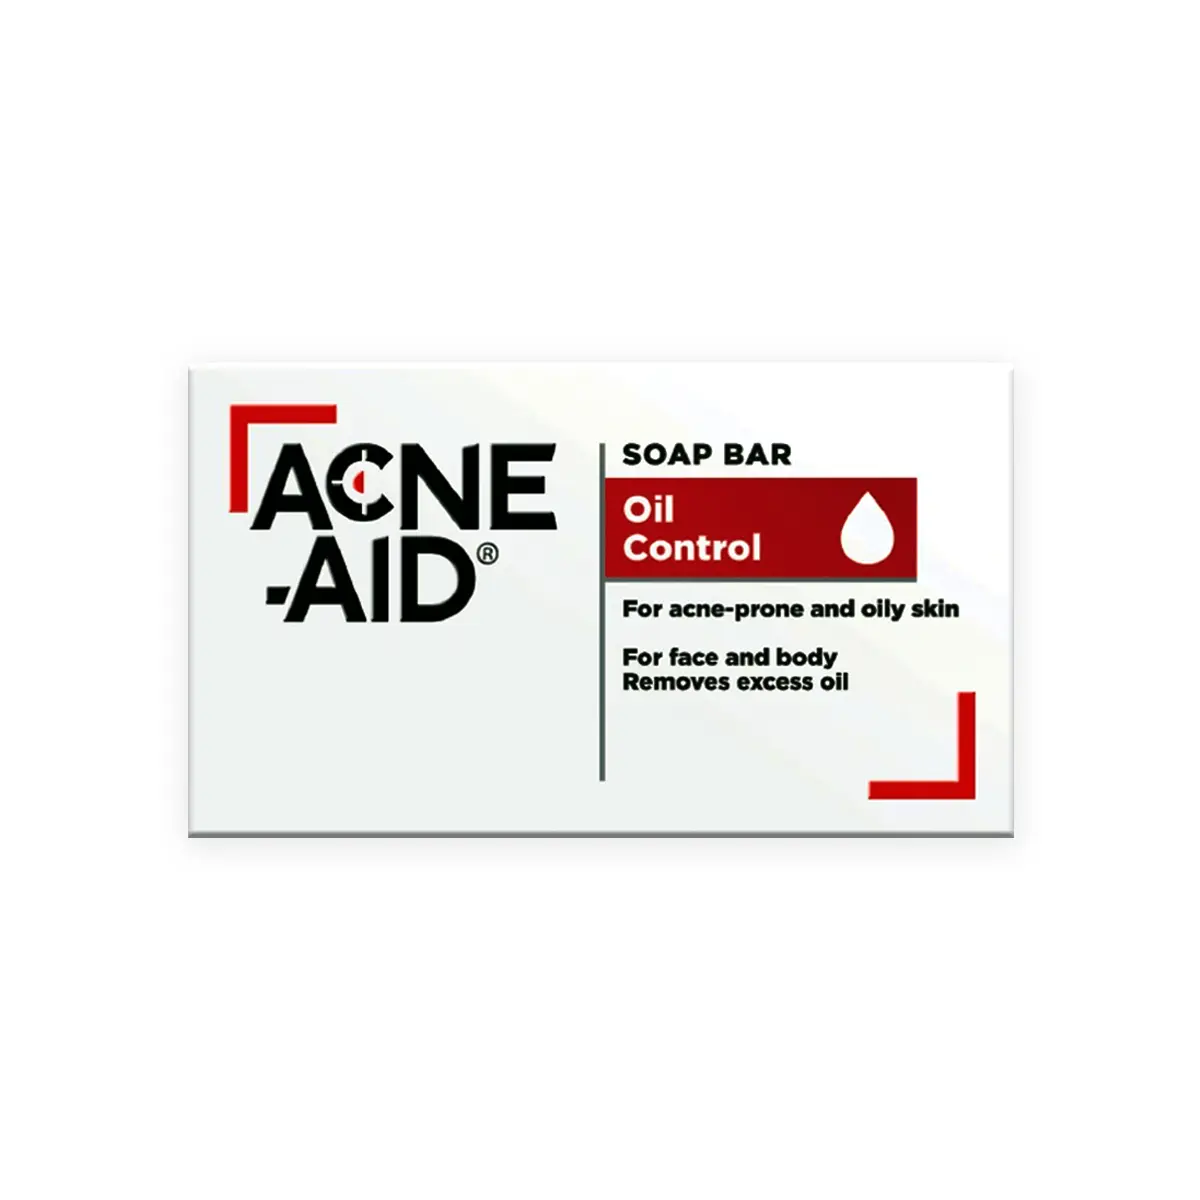 First product image of Acne-Aid Soap Bar 100g